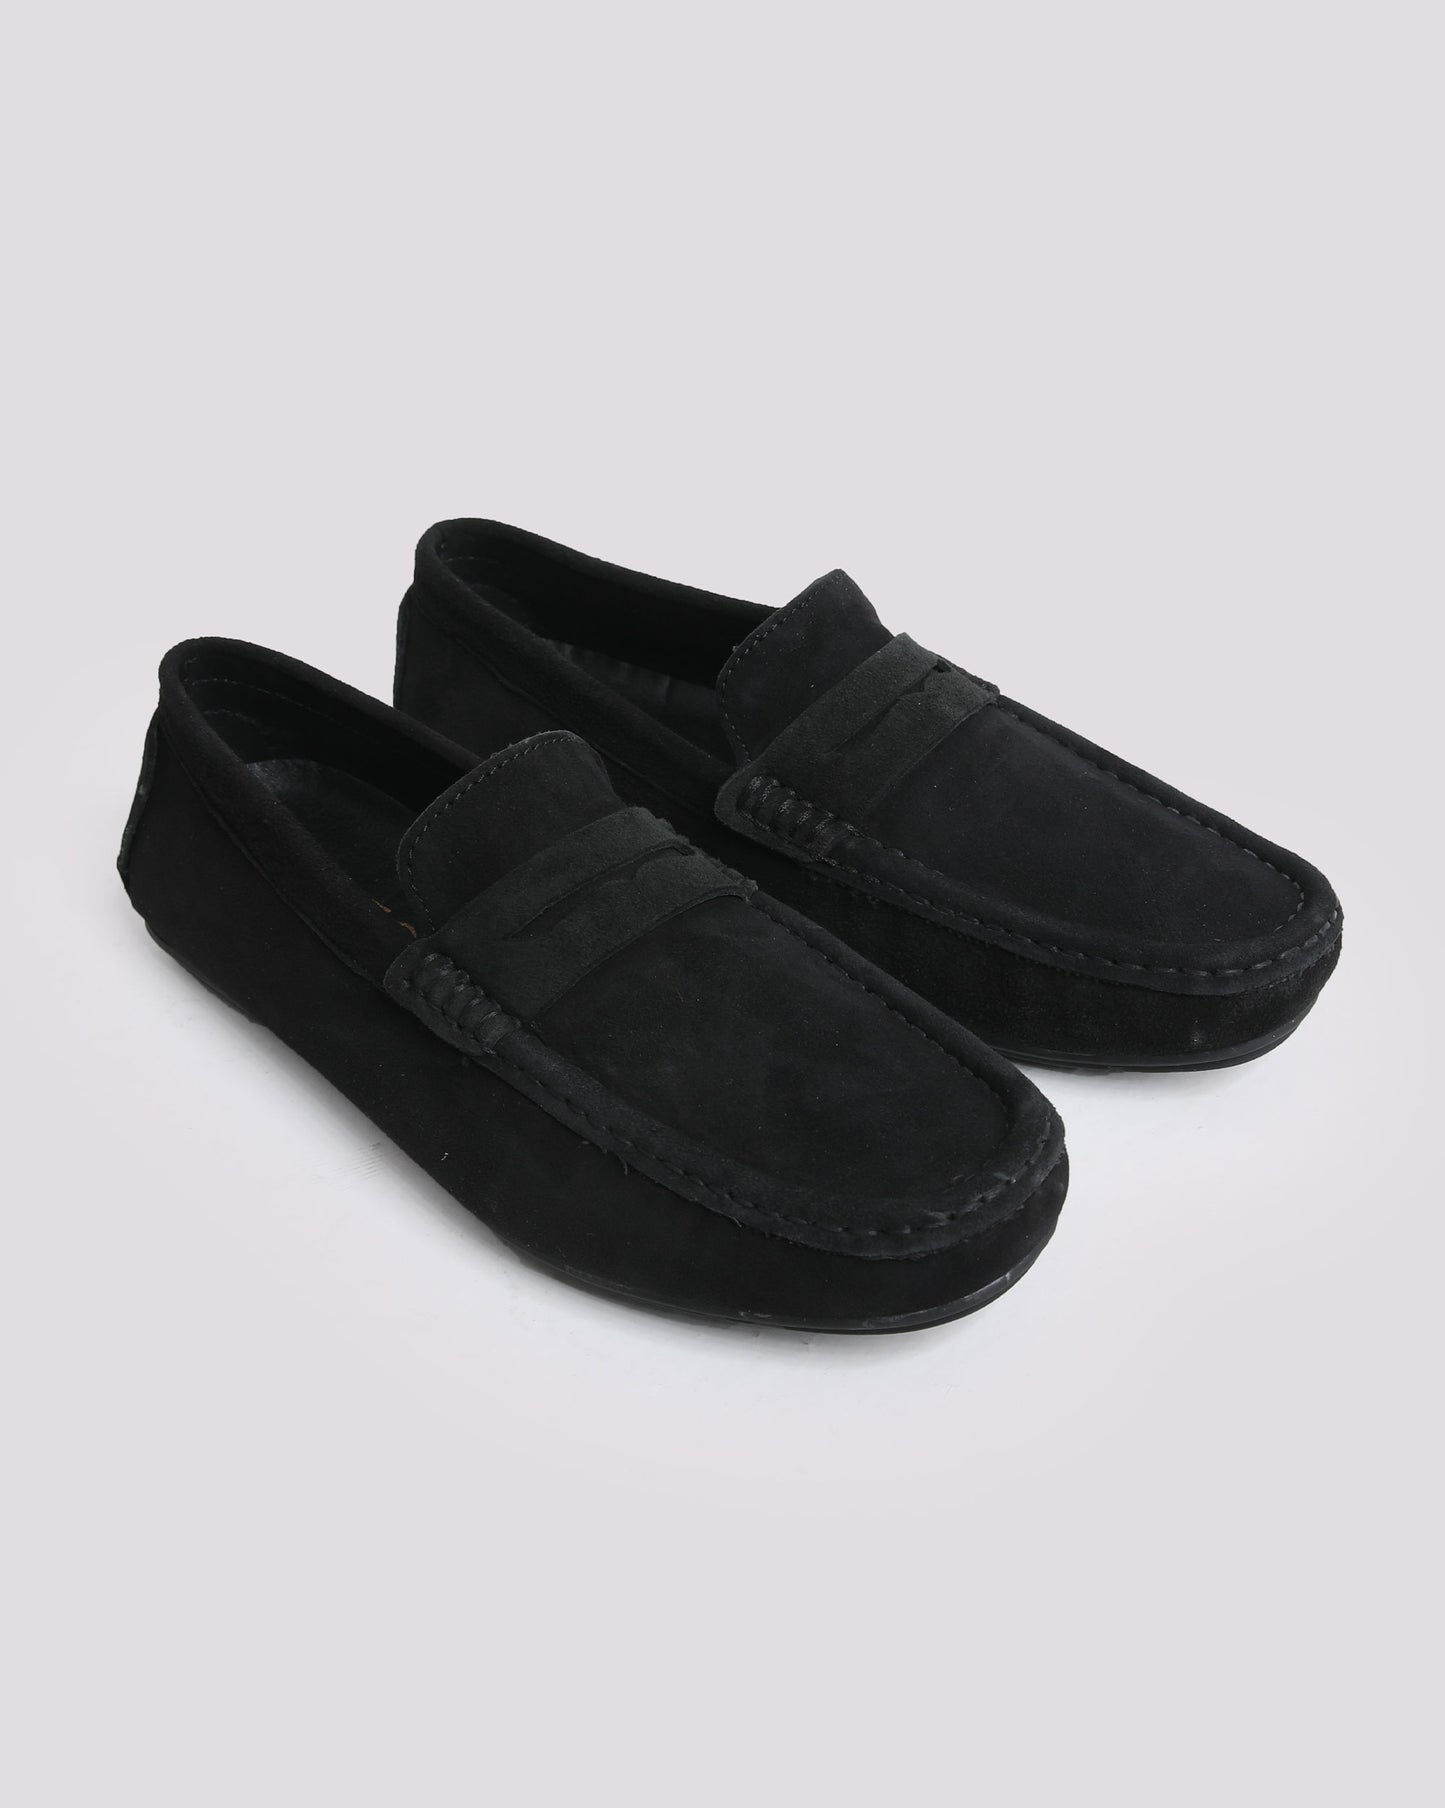 BLACK SUEDE LEATHER MOCCASIN